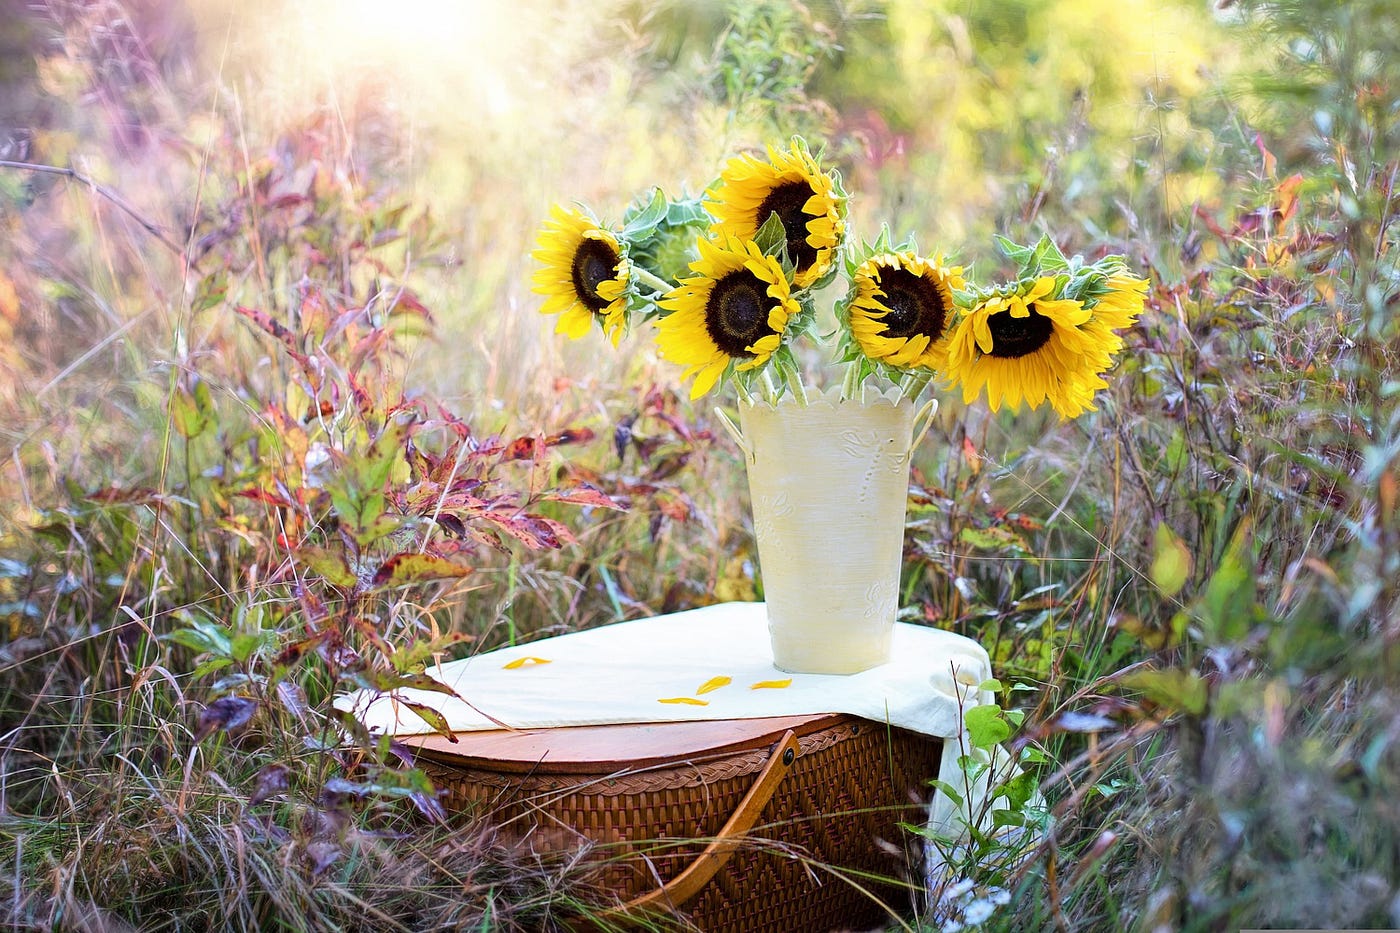 How To Keep Sunflowers Alive In A Vase